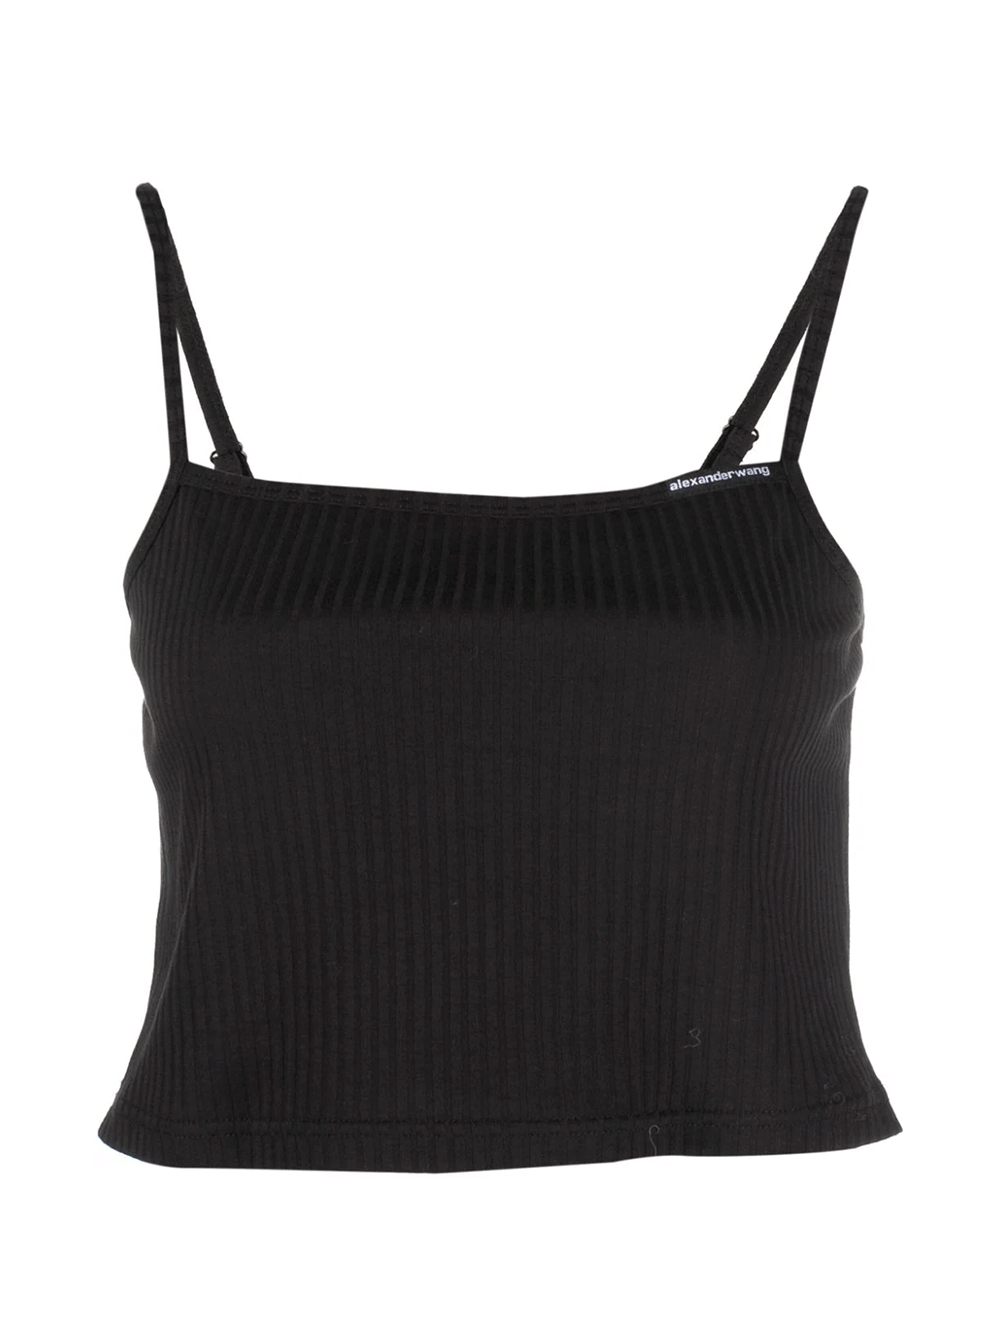 T-By-Alexander-Wang-Cami-Top-With-Skinny-Woven-Label-Black_1